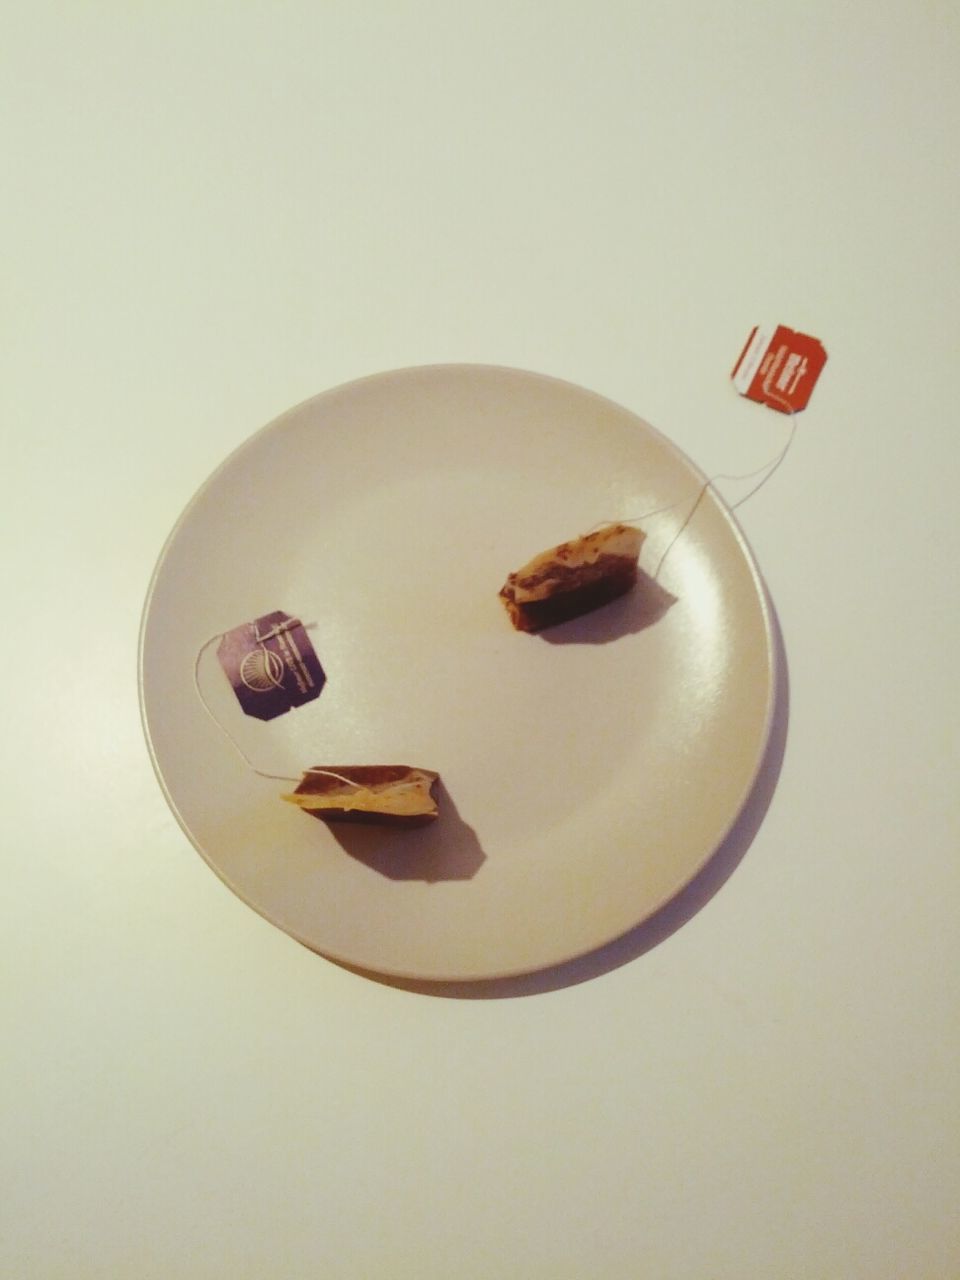 Teabags in plate on table